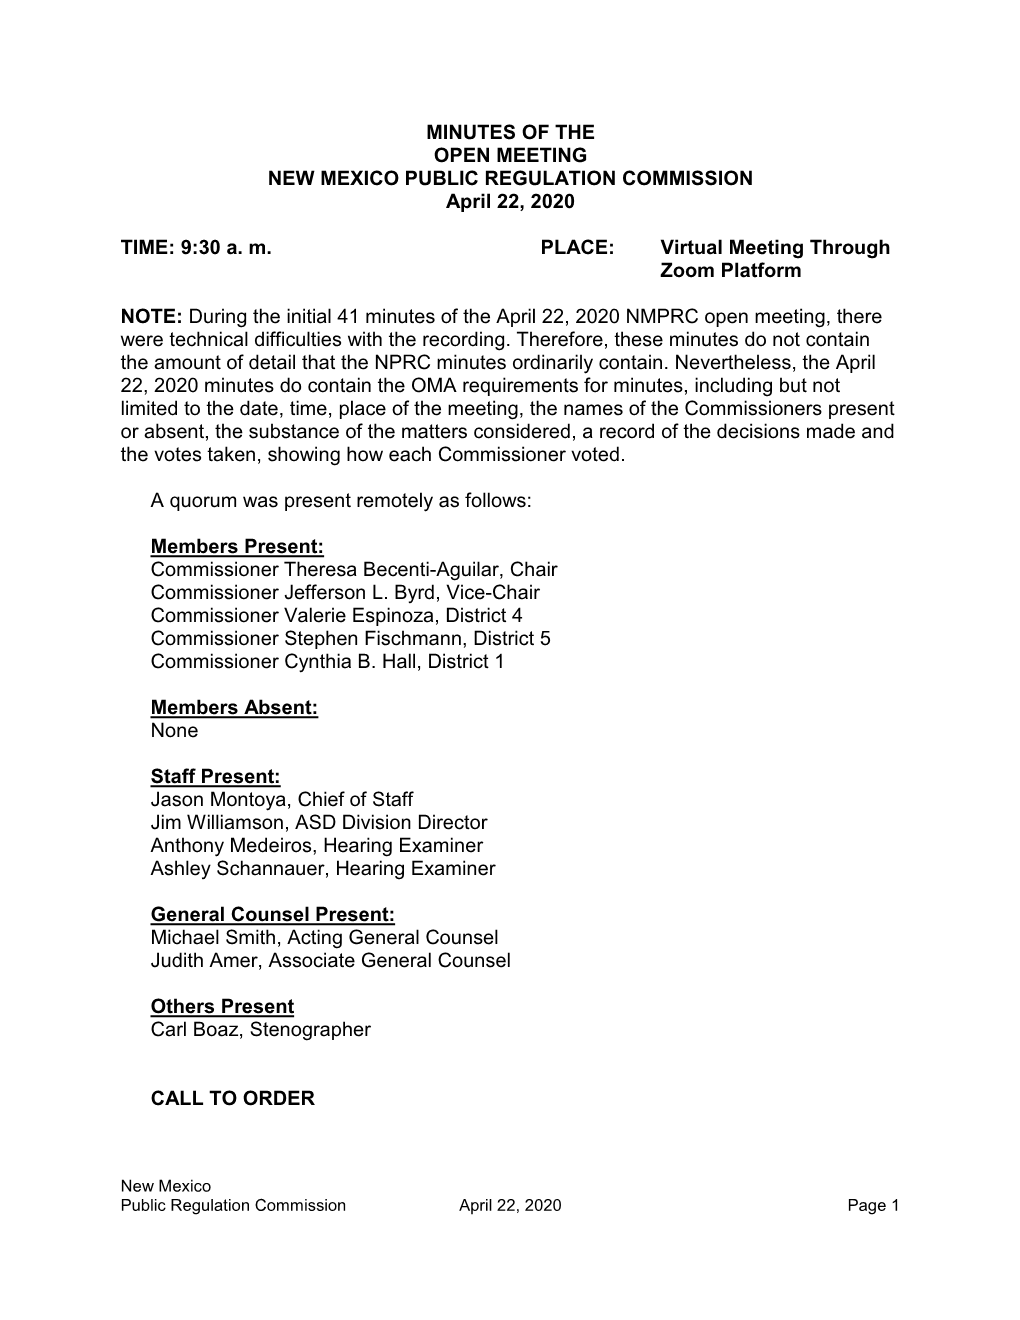 MINUTES of the OPEN MEETING NEW MEXICO PUBLIC REGULATION COMMISSION April 22, 2020